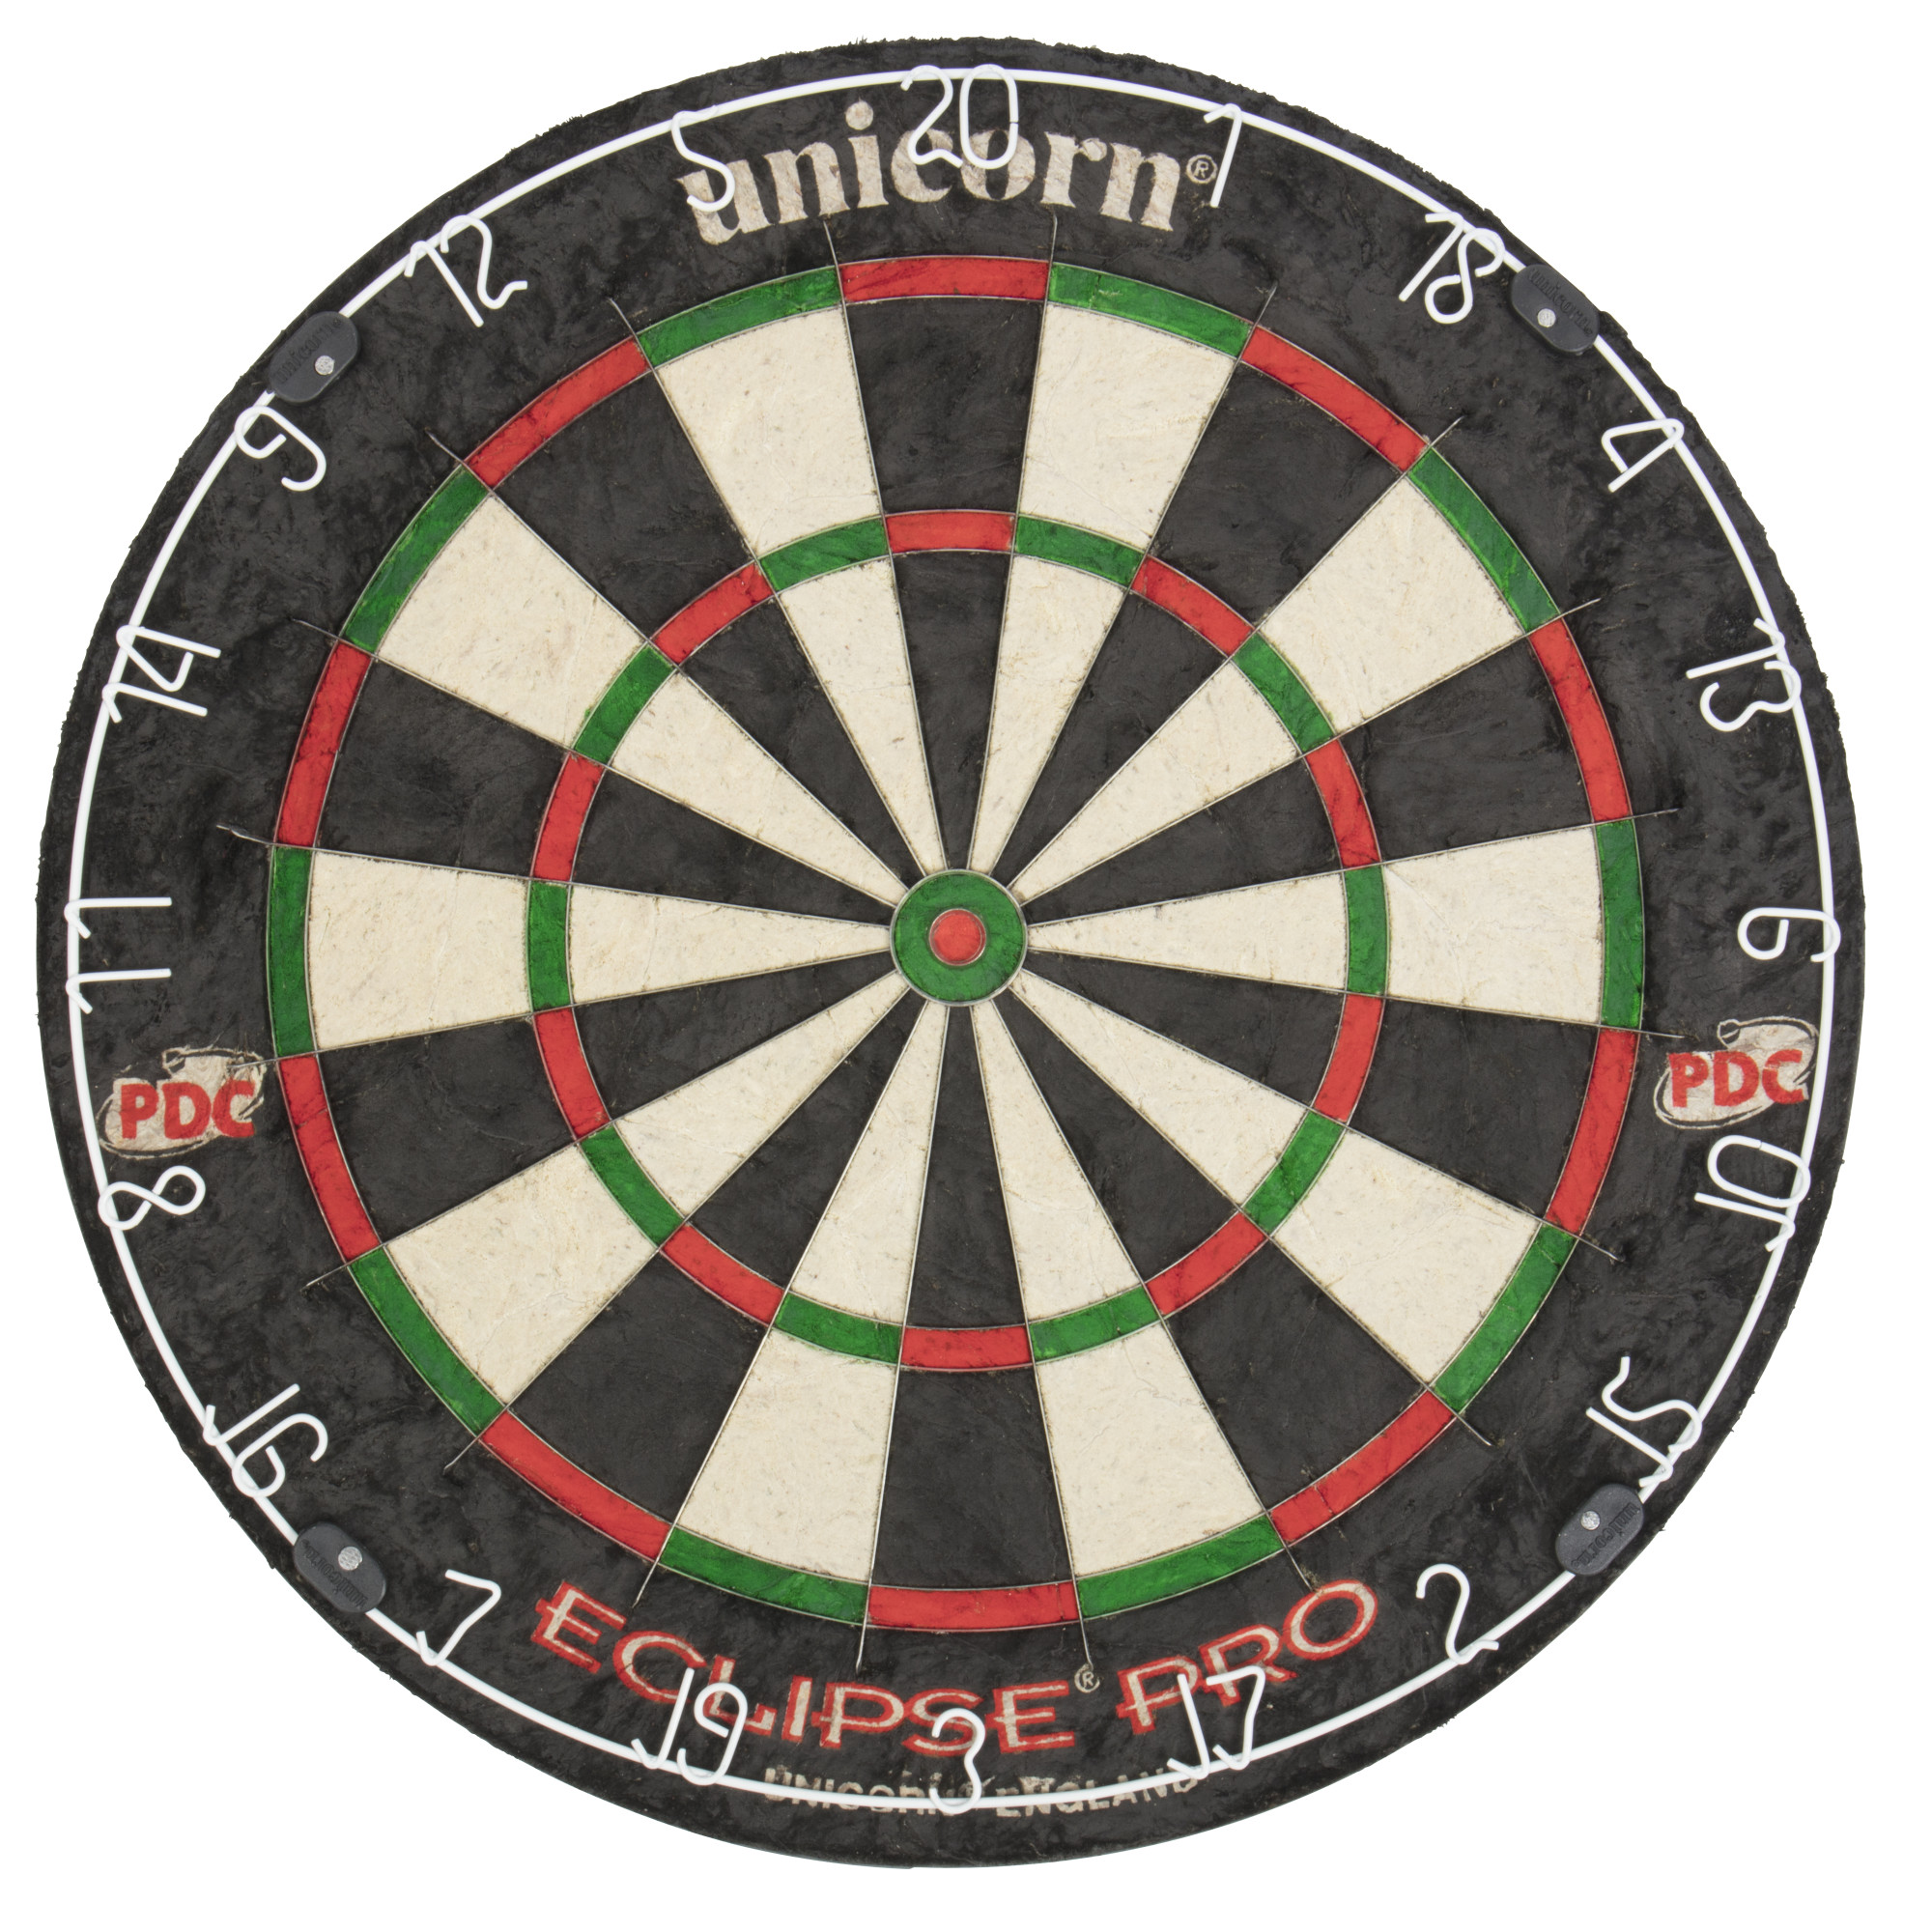 Unicorn Eclipse Pro Dart Board with Ultra slim Segmentation ? 30% Thinner Than Conventional Boards - image 1 of 9